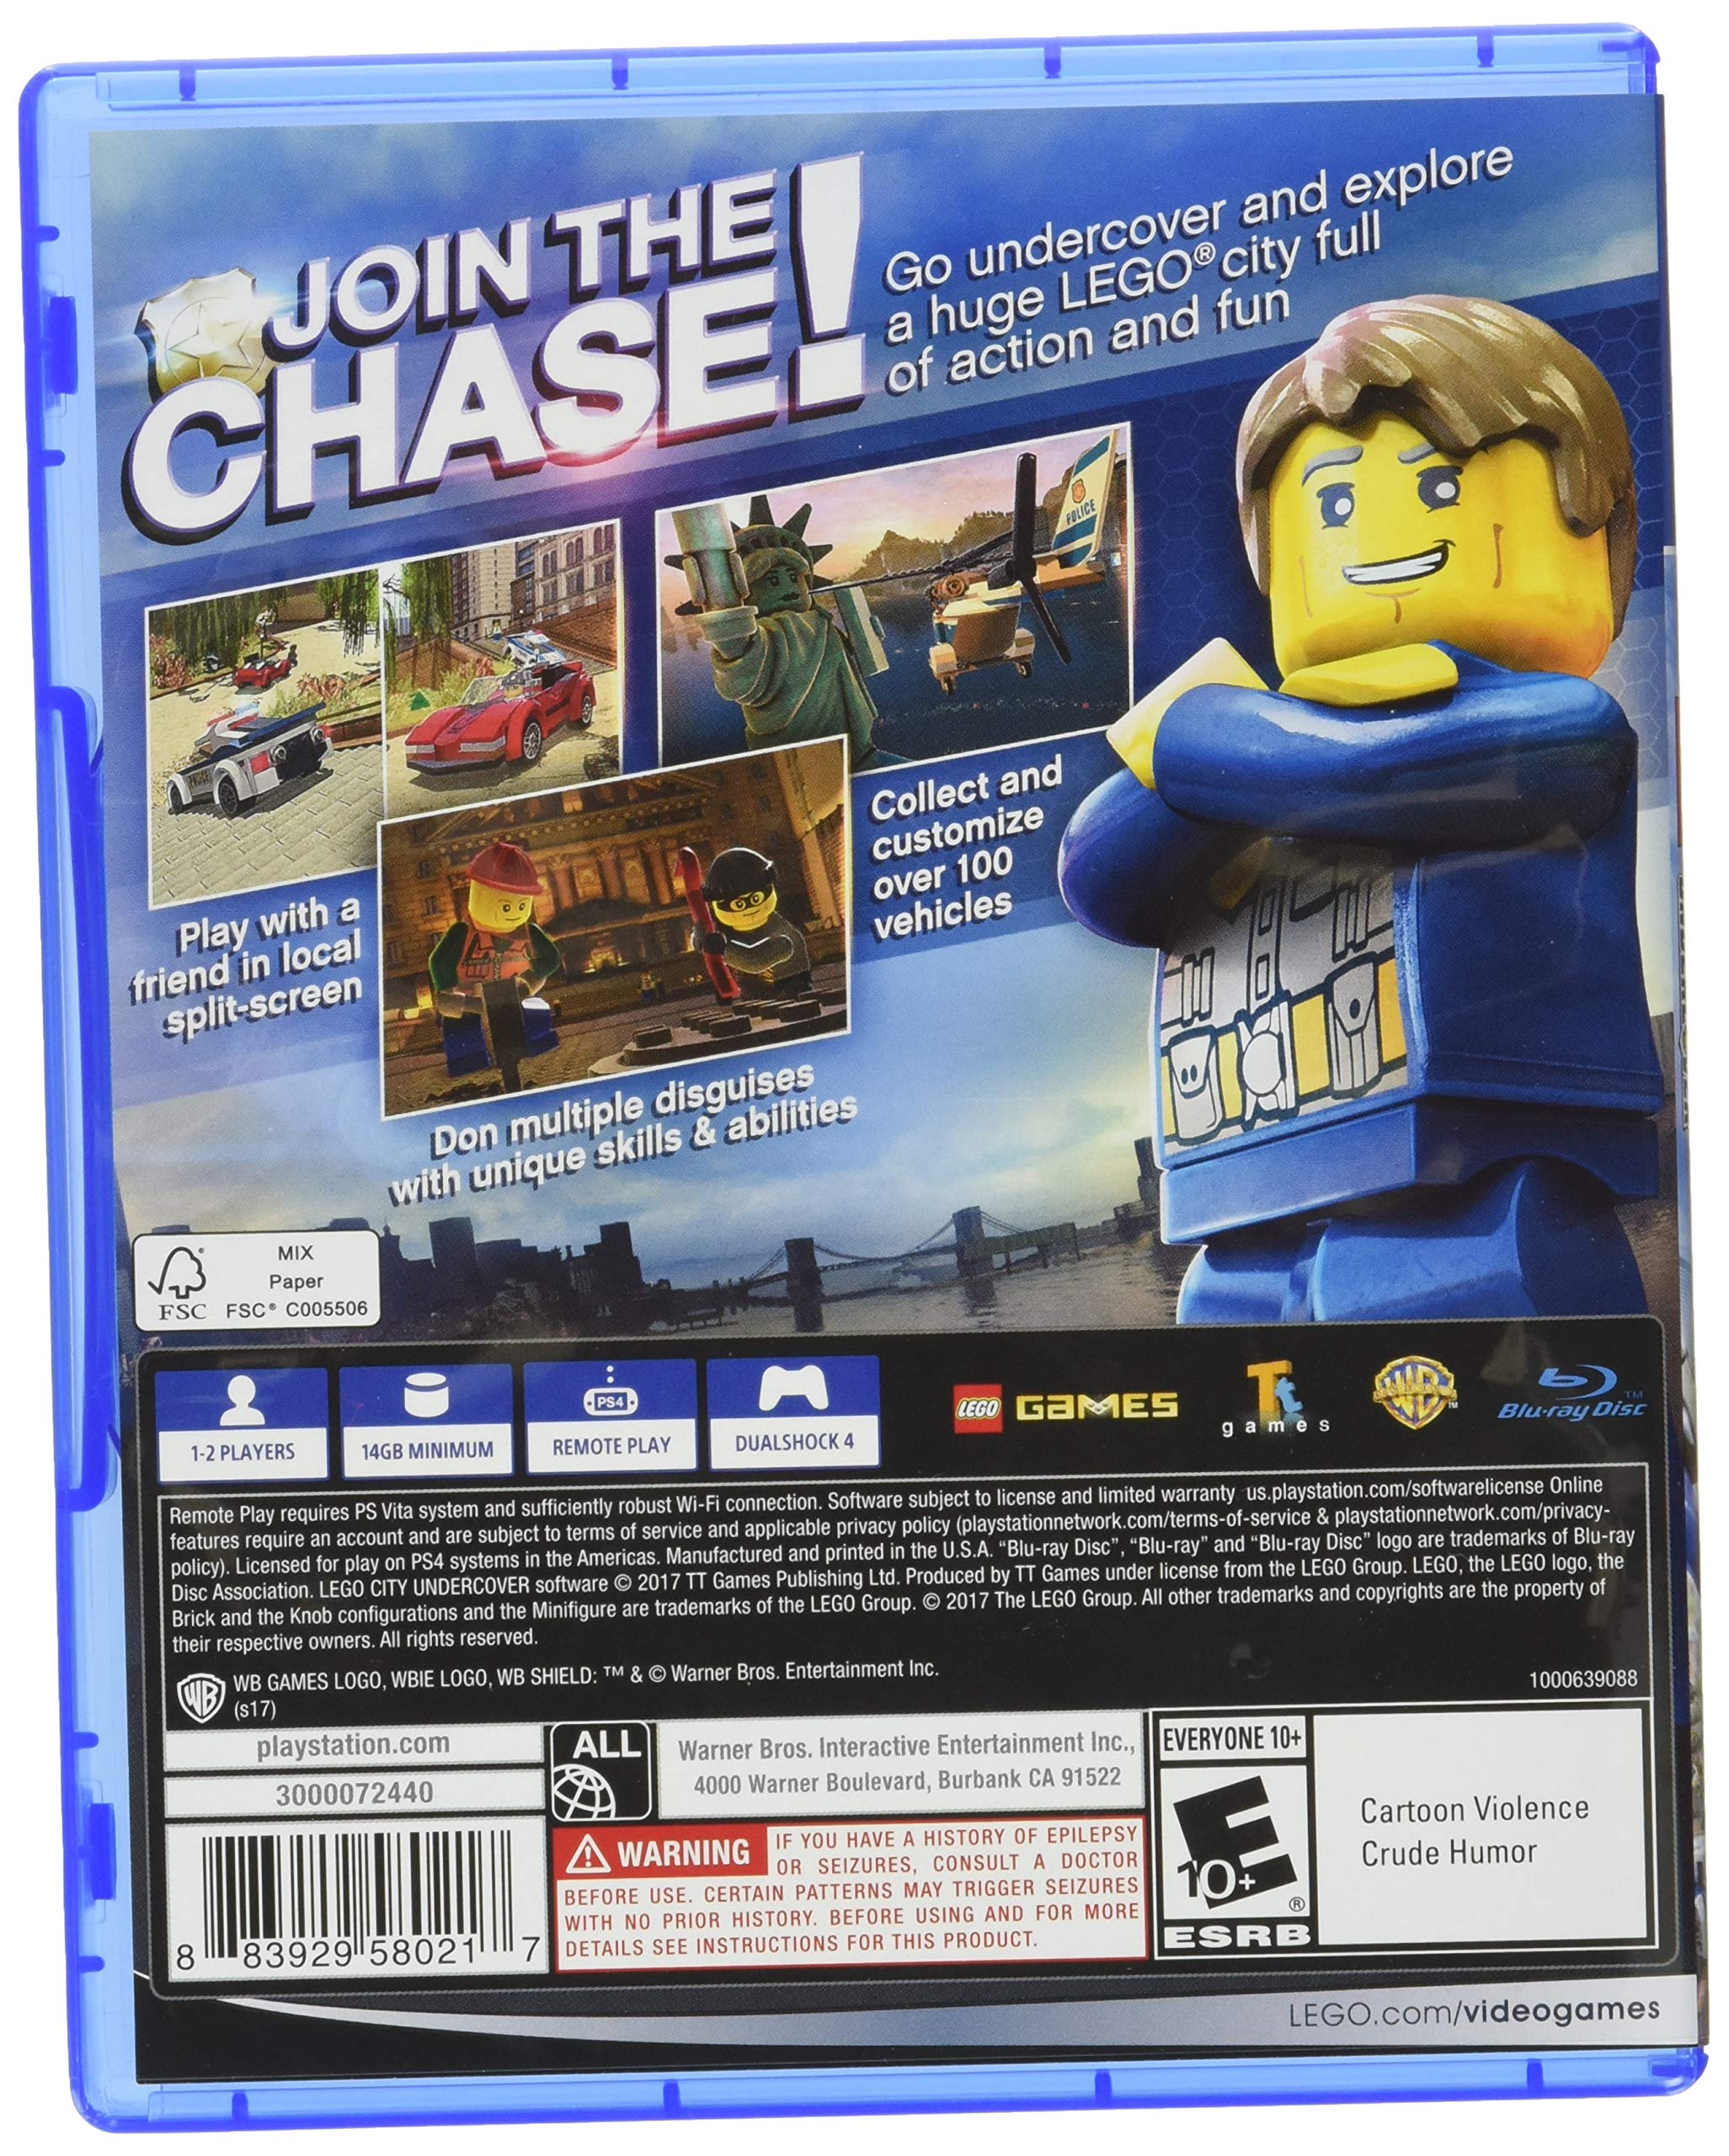 LEGO City Undercover - PlayStation 4